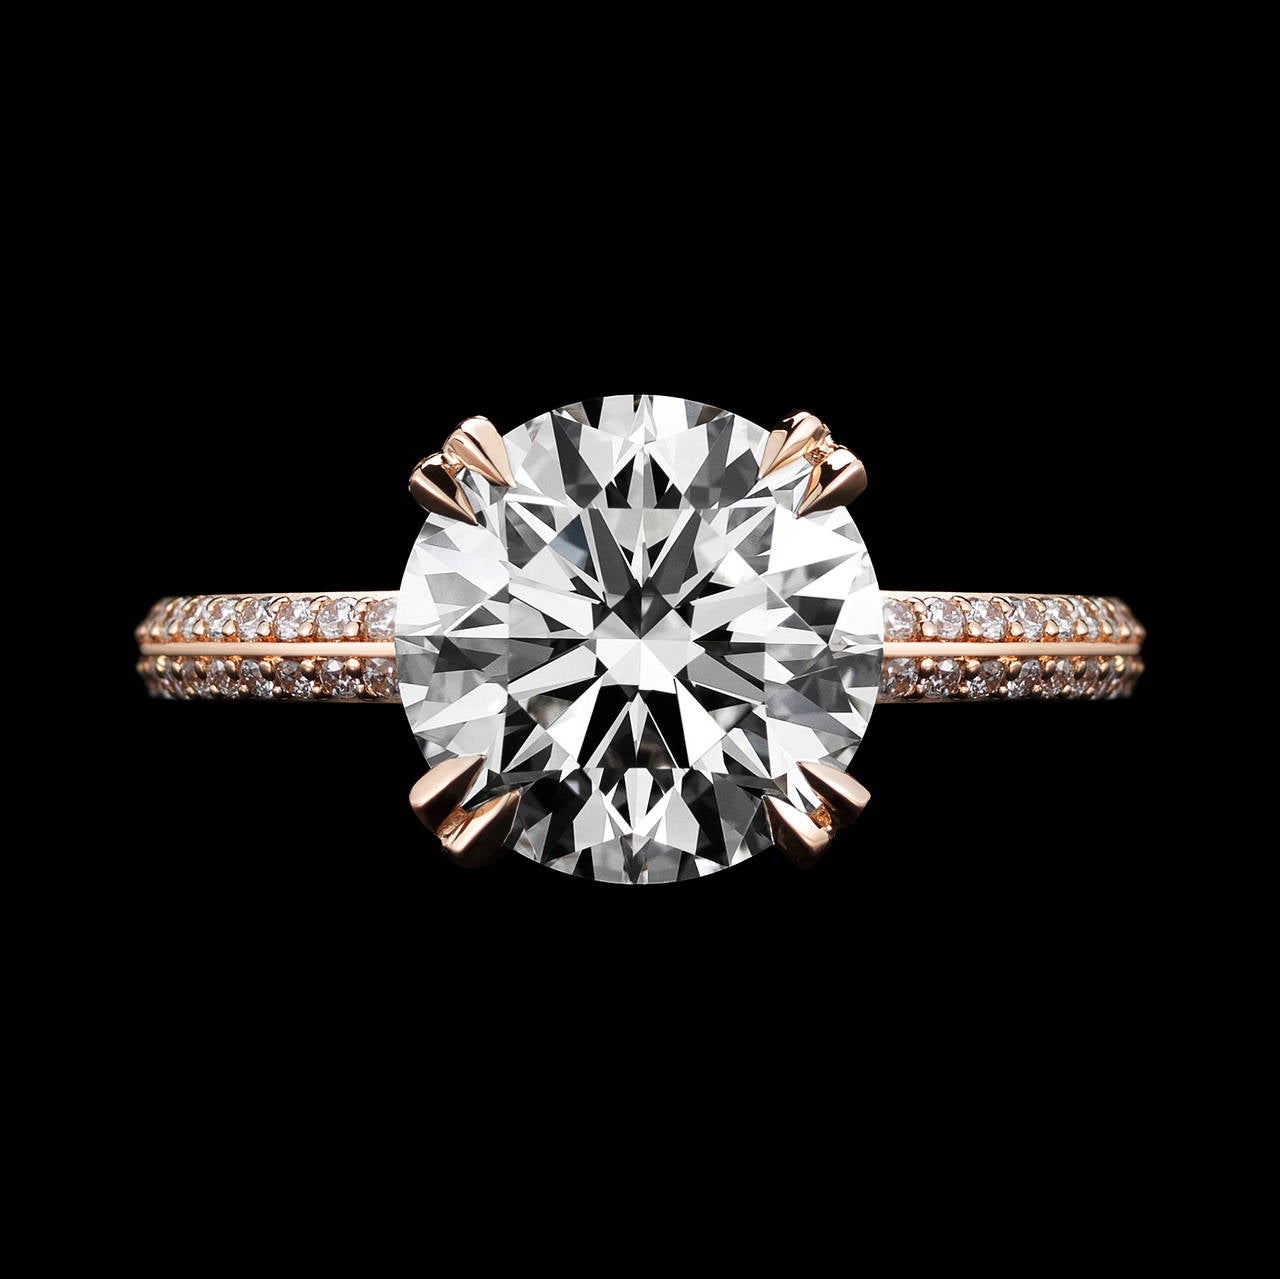 *This design is available with center diamonds weighing from 1ct - 5cts and larger. Please contact us for more information on this piece or on creating your own custom Alexandra Mor Design.  

This Alexandra Mor engagement ring features a AGS